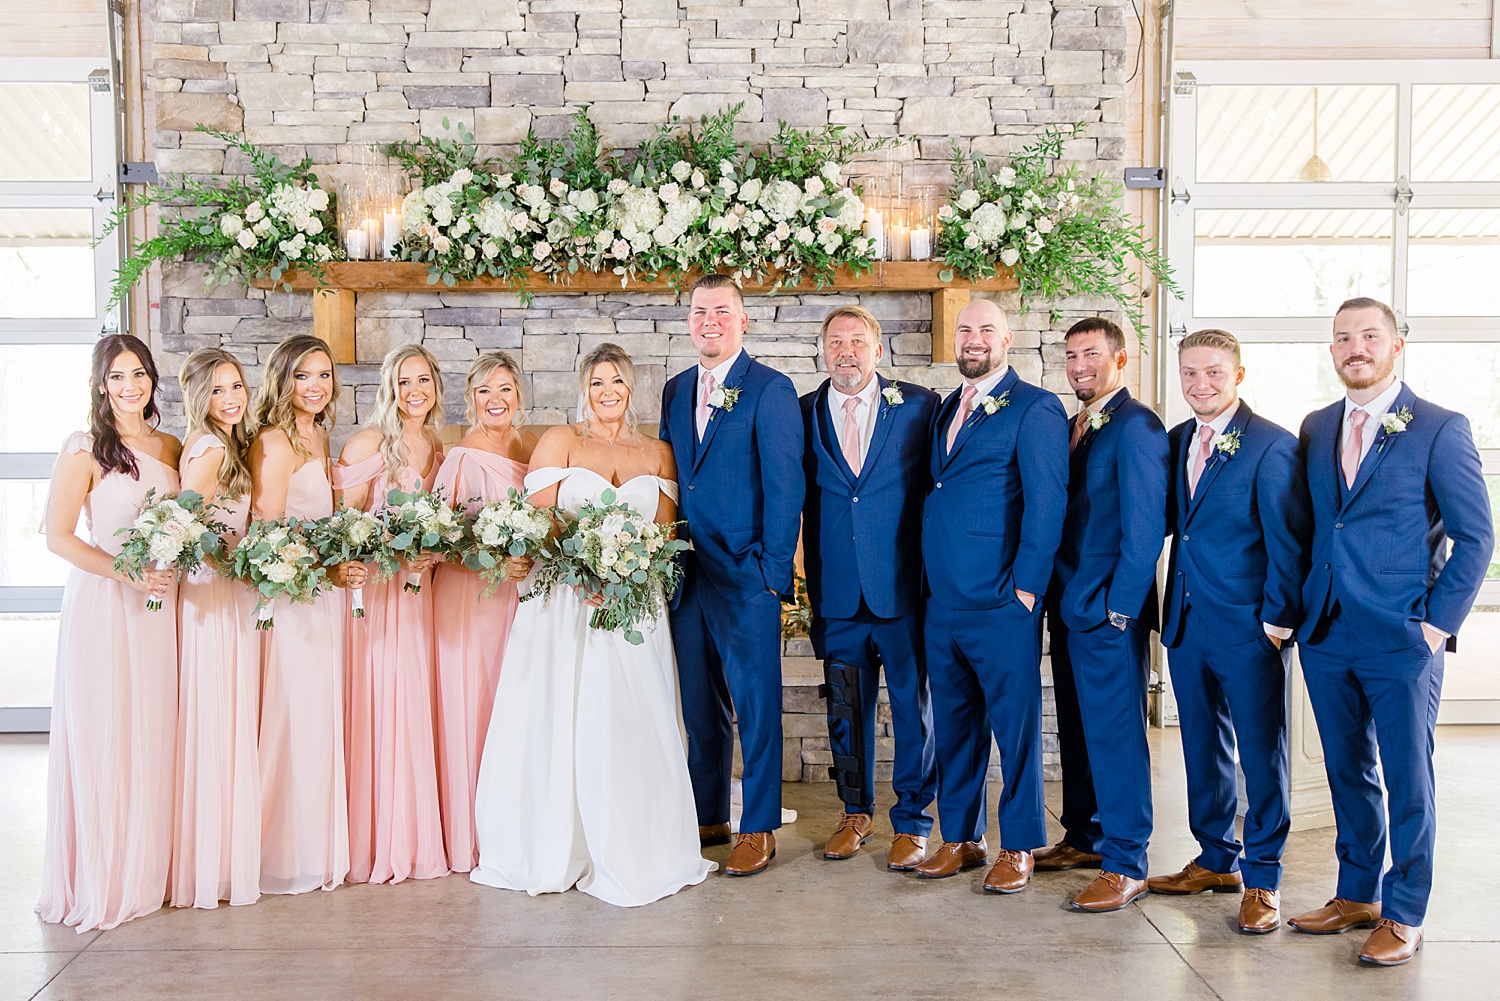 wedding party by stone fireplace at Mathews Manor in Springville, AL